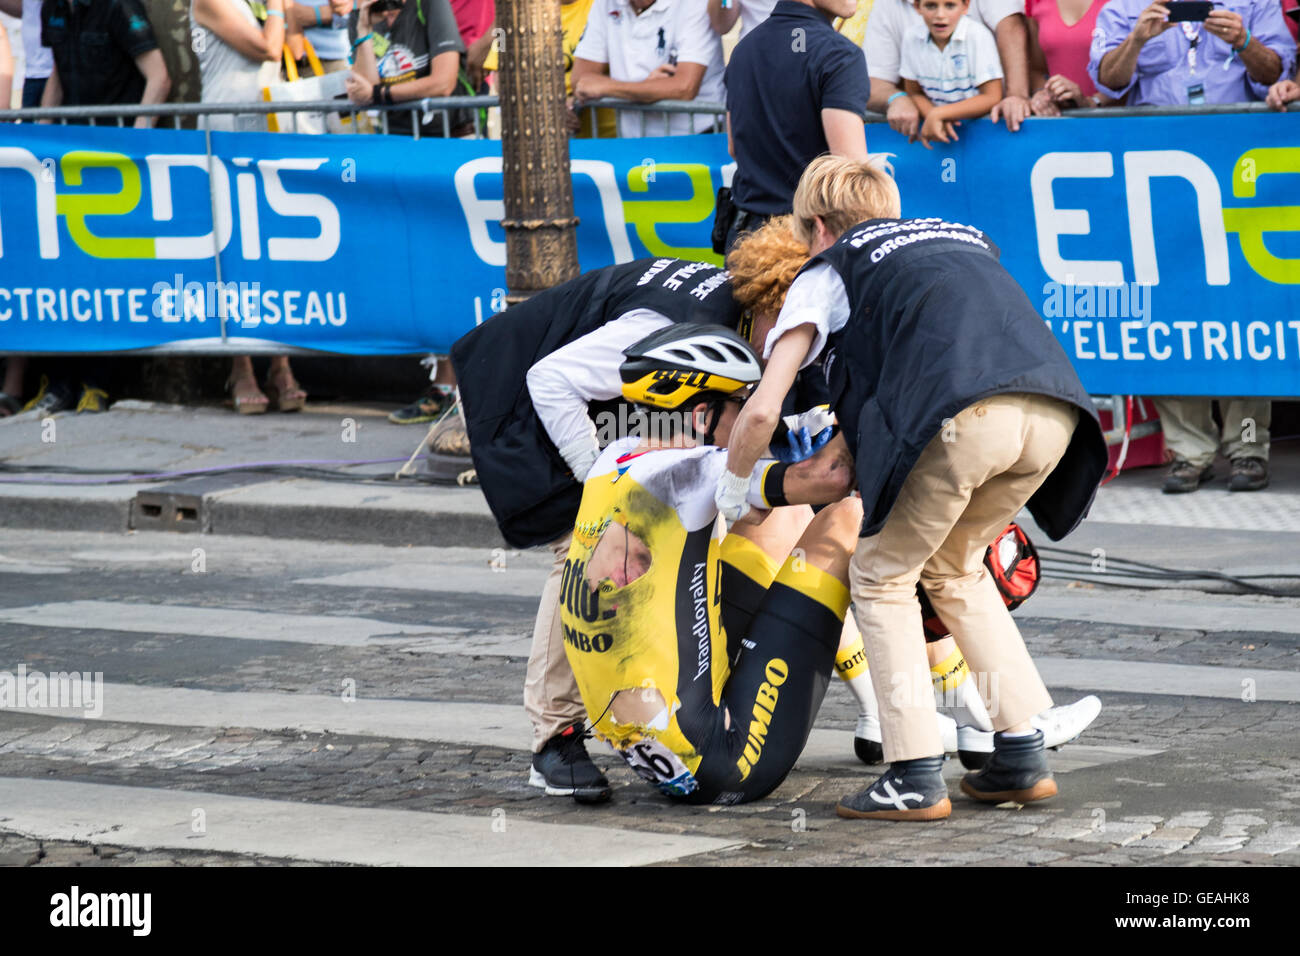 24th July, 2016. Paris, FR. Timo Roosen (Team LottoNL-Jumbo) crashes on the final lap of the circuit in Paris. Despite injury, Roosen acquired a new bike from a team car to finish the stage. John Kavouris/Alamy Live News Stock Photo